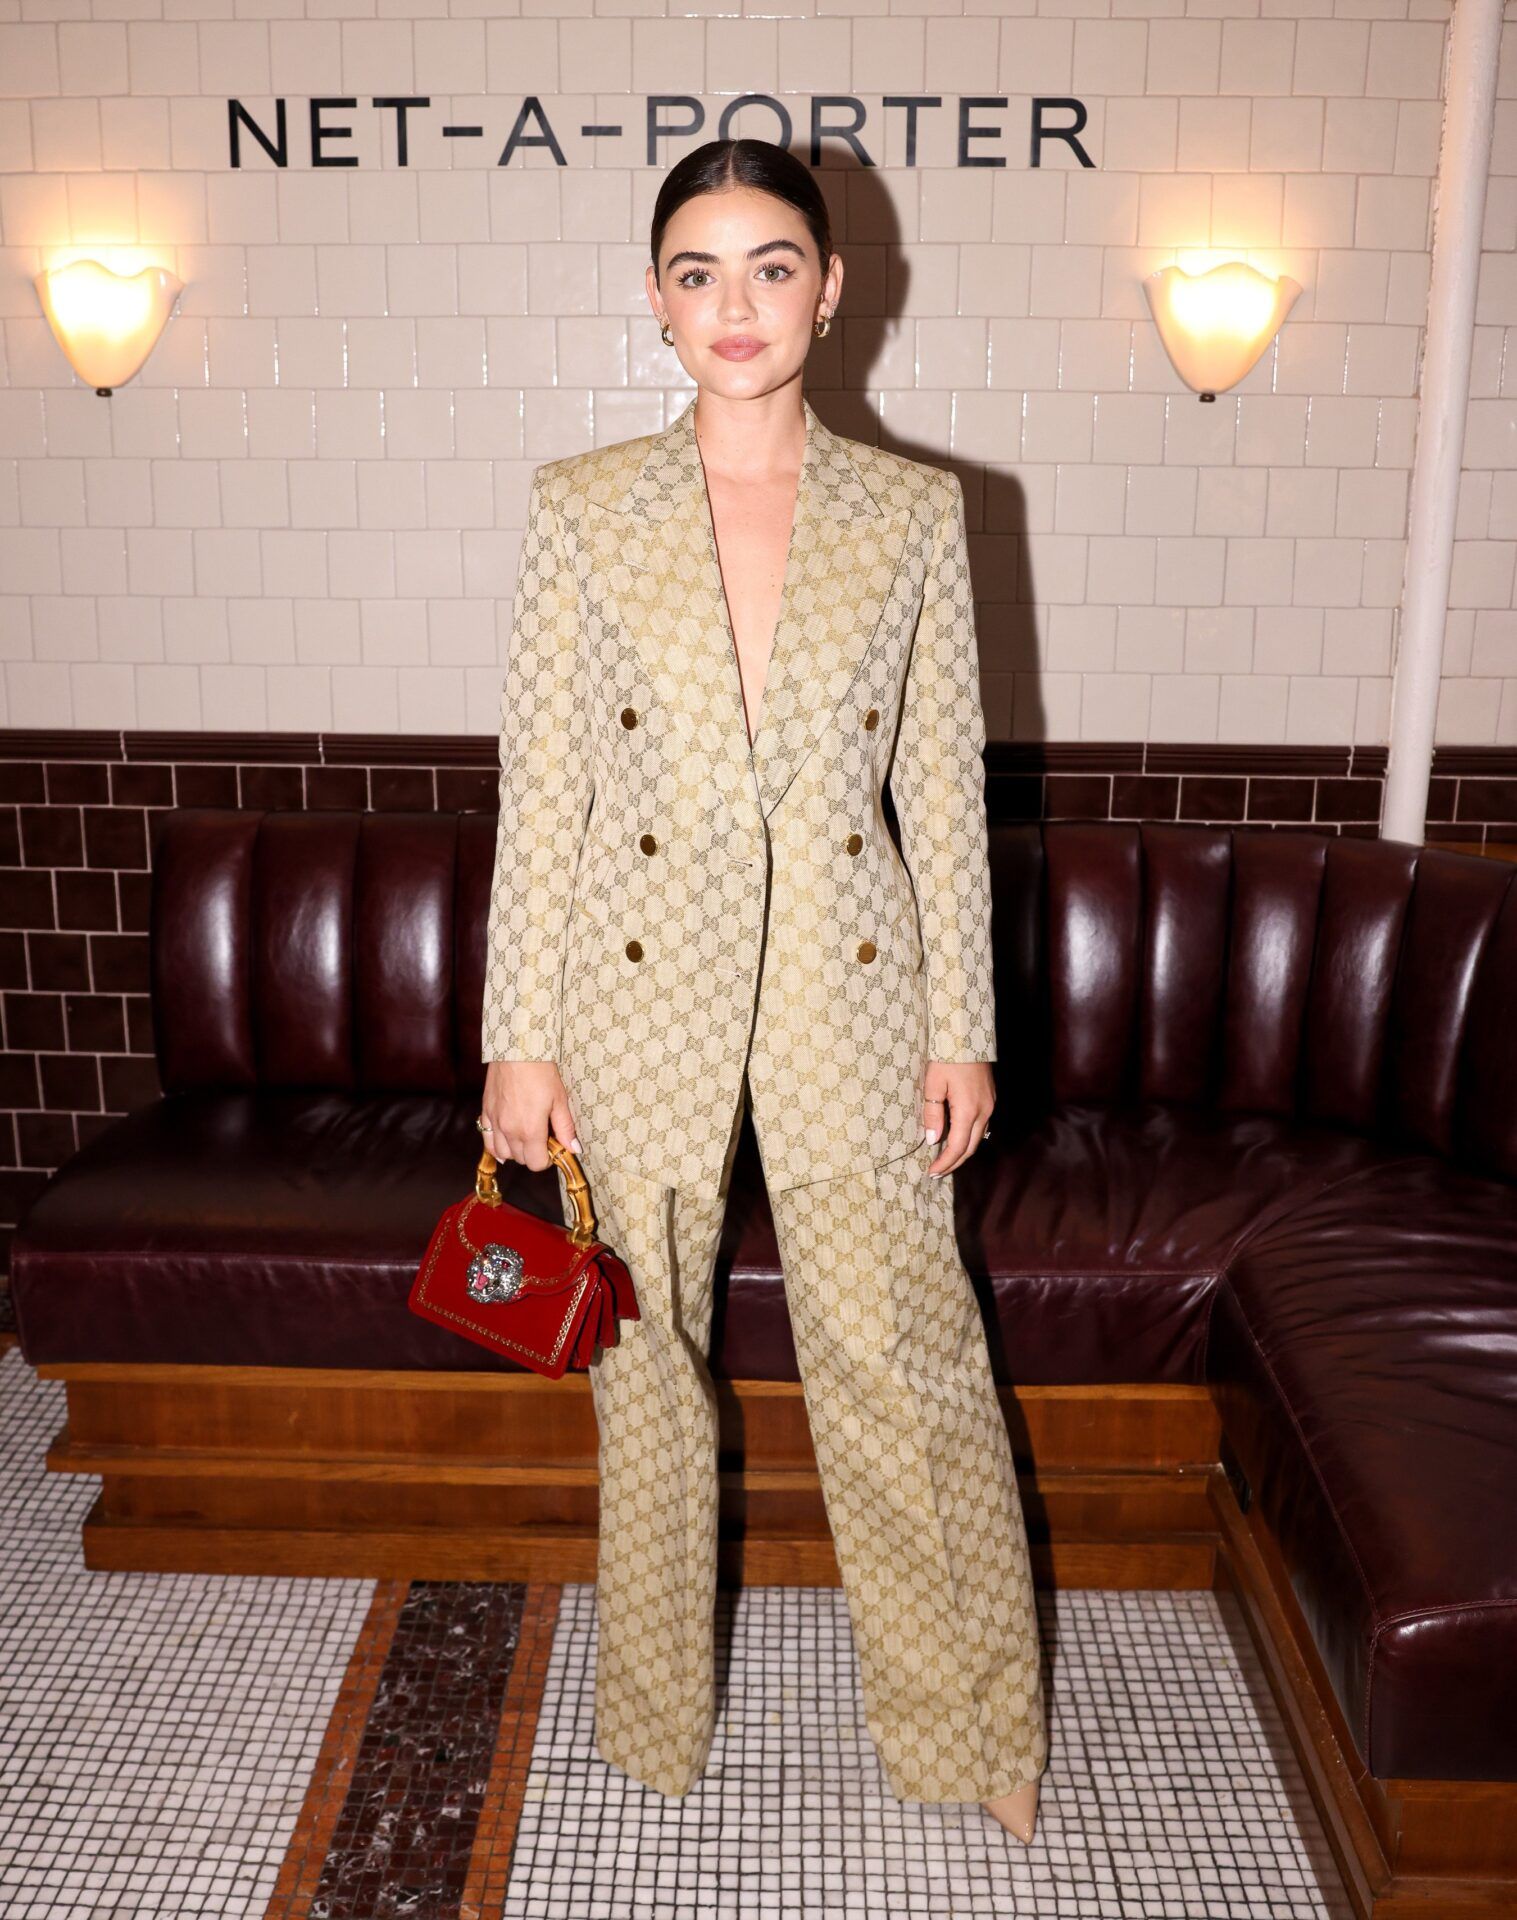 Lucy Hale - NYFW | Net-A-Porter | Blake Lively style